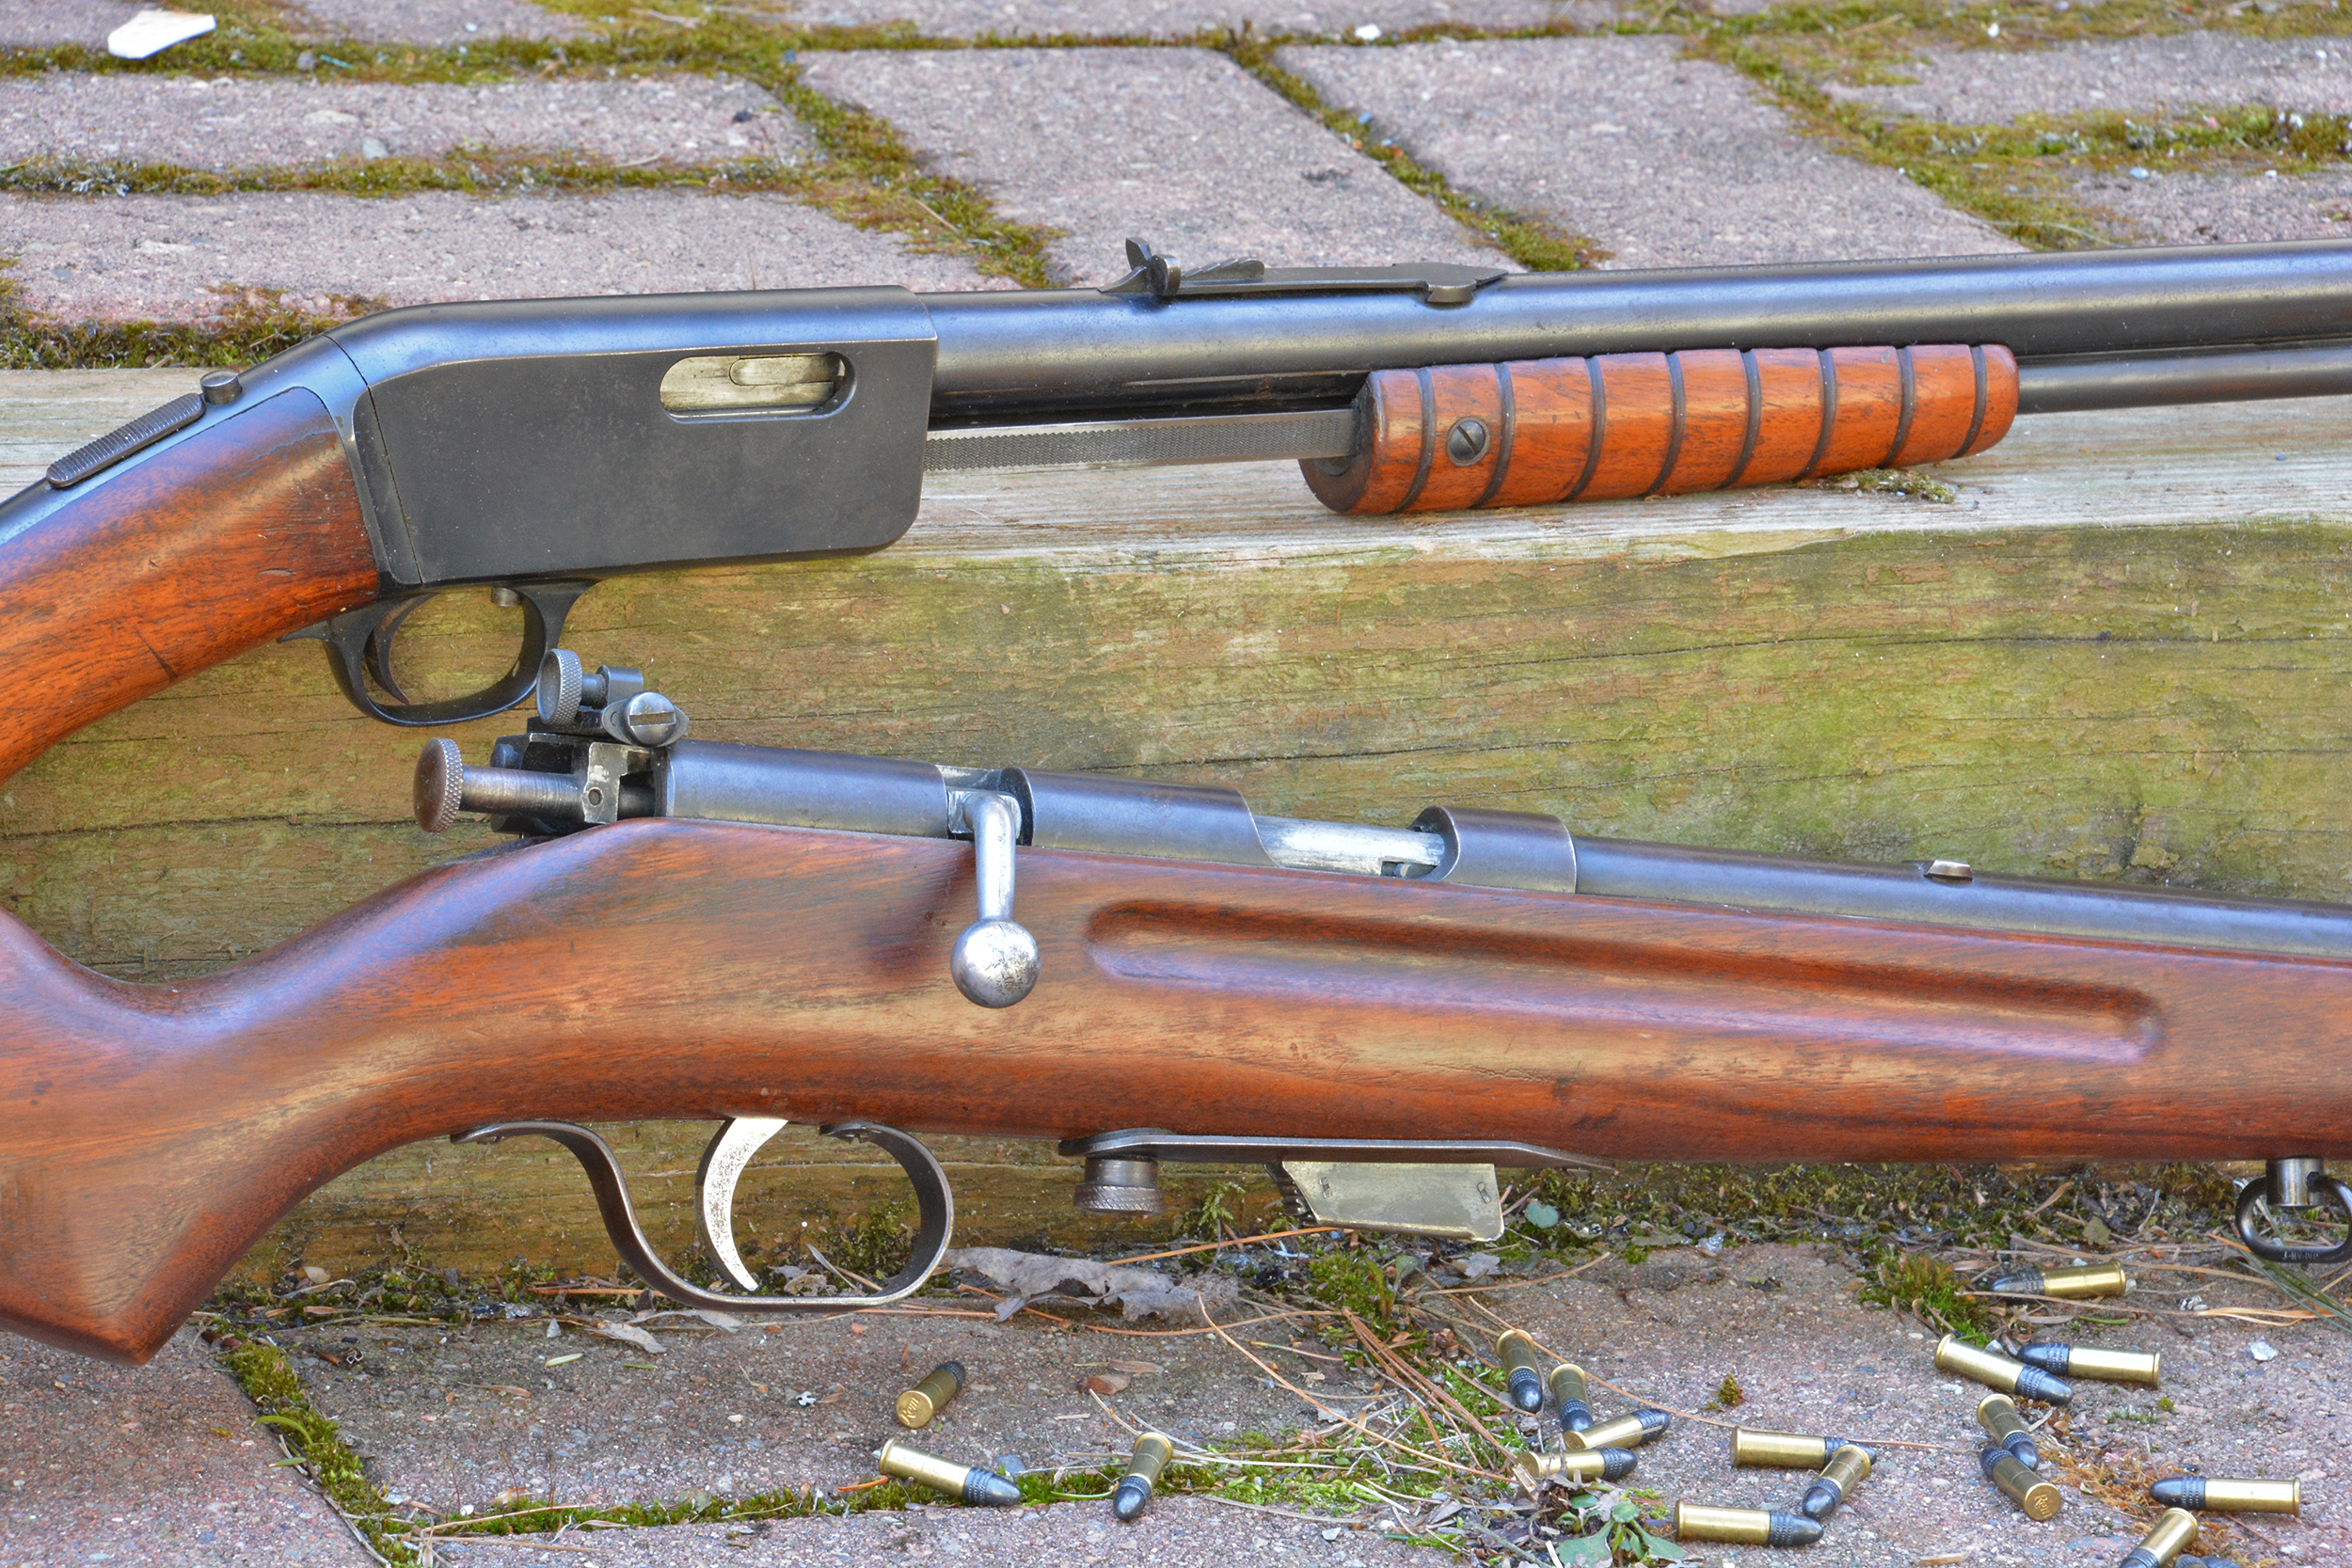 Two Marlin rimfire rifles, one from before WWI and the other manufactured after.